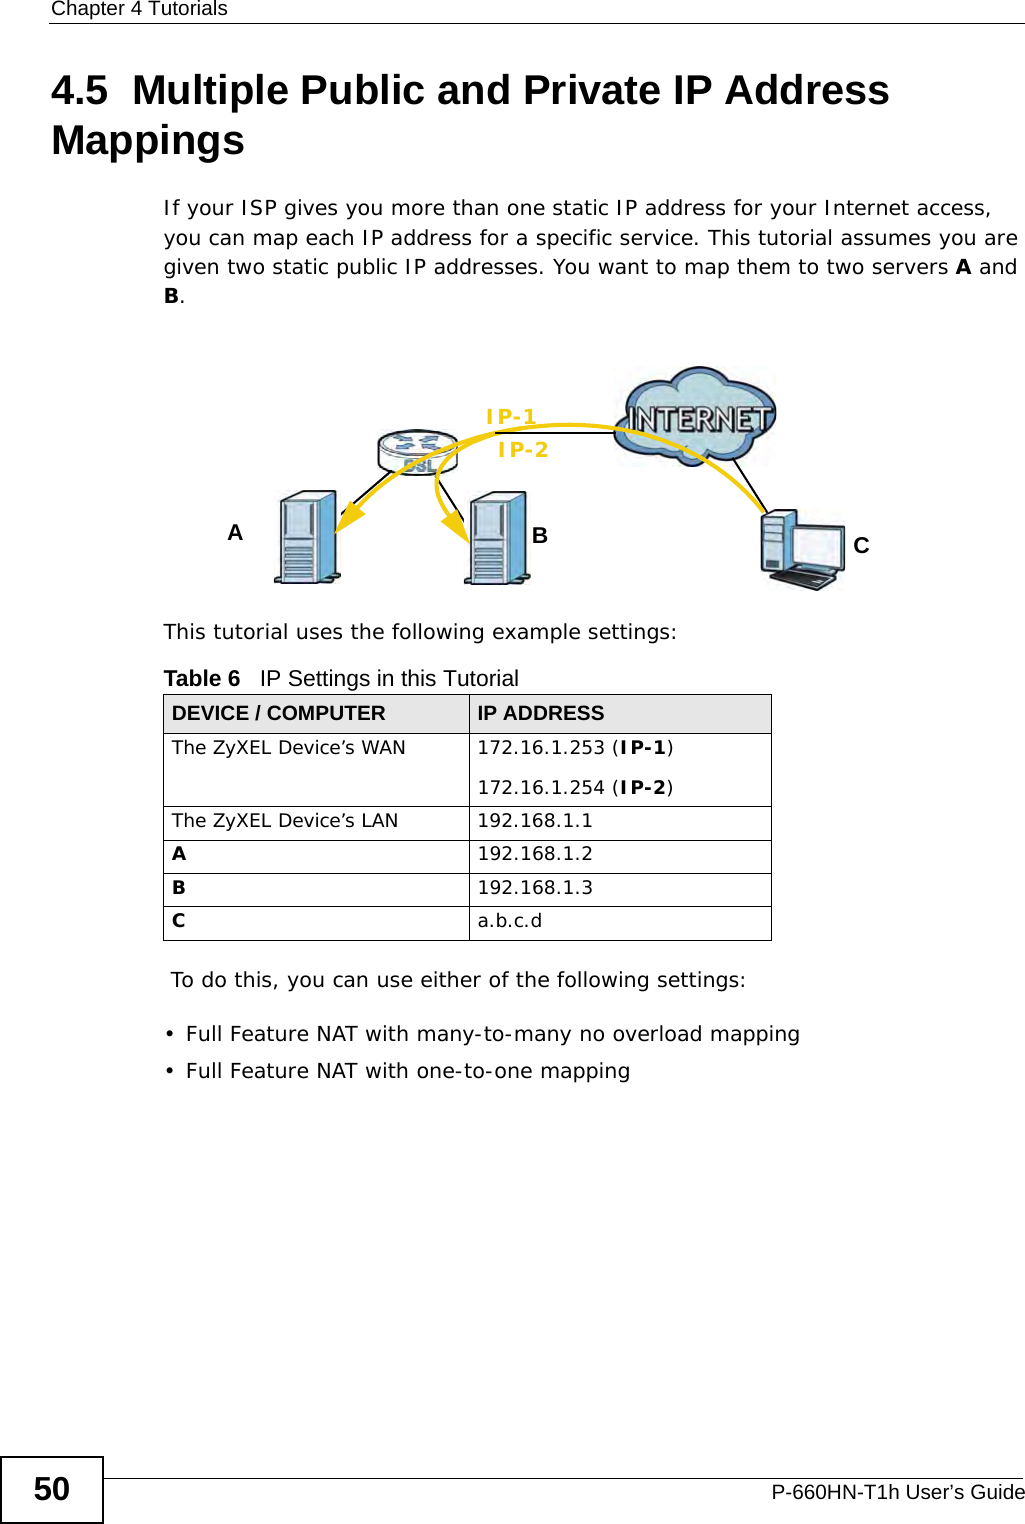 Chapter 4 TutorialsP-660HN-T1h User’s Guide504.5  Multiple Public and Private IP Address MappingsIf your ISP gives you more than one static IP address for your Internet access, you can map each IP address for a specific service. This tutorial assumes you are given two static public IP addresses. You want to map them to two servers A and B.This tutorial uses the following example settings: To do this, you can use either of the following settings:• Full Feature NAT with many-to-many no overload mapping• Full Feature NAT with one-to-one mappingTable 6   IP Settings in this TutorialDEVICE / COMPUTER IP ADDRESSThe ZyXEL Device’s WAN 172.16.1.253 (IP-1)172.16.1.254 (IP-2)The ZyXEL Device’s LAN 192.168.1.1A192.168.1.2B192.168.1.3Ca.b.c.dABIP-1IP-2C